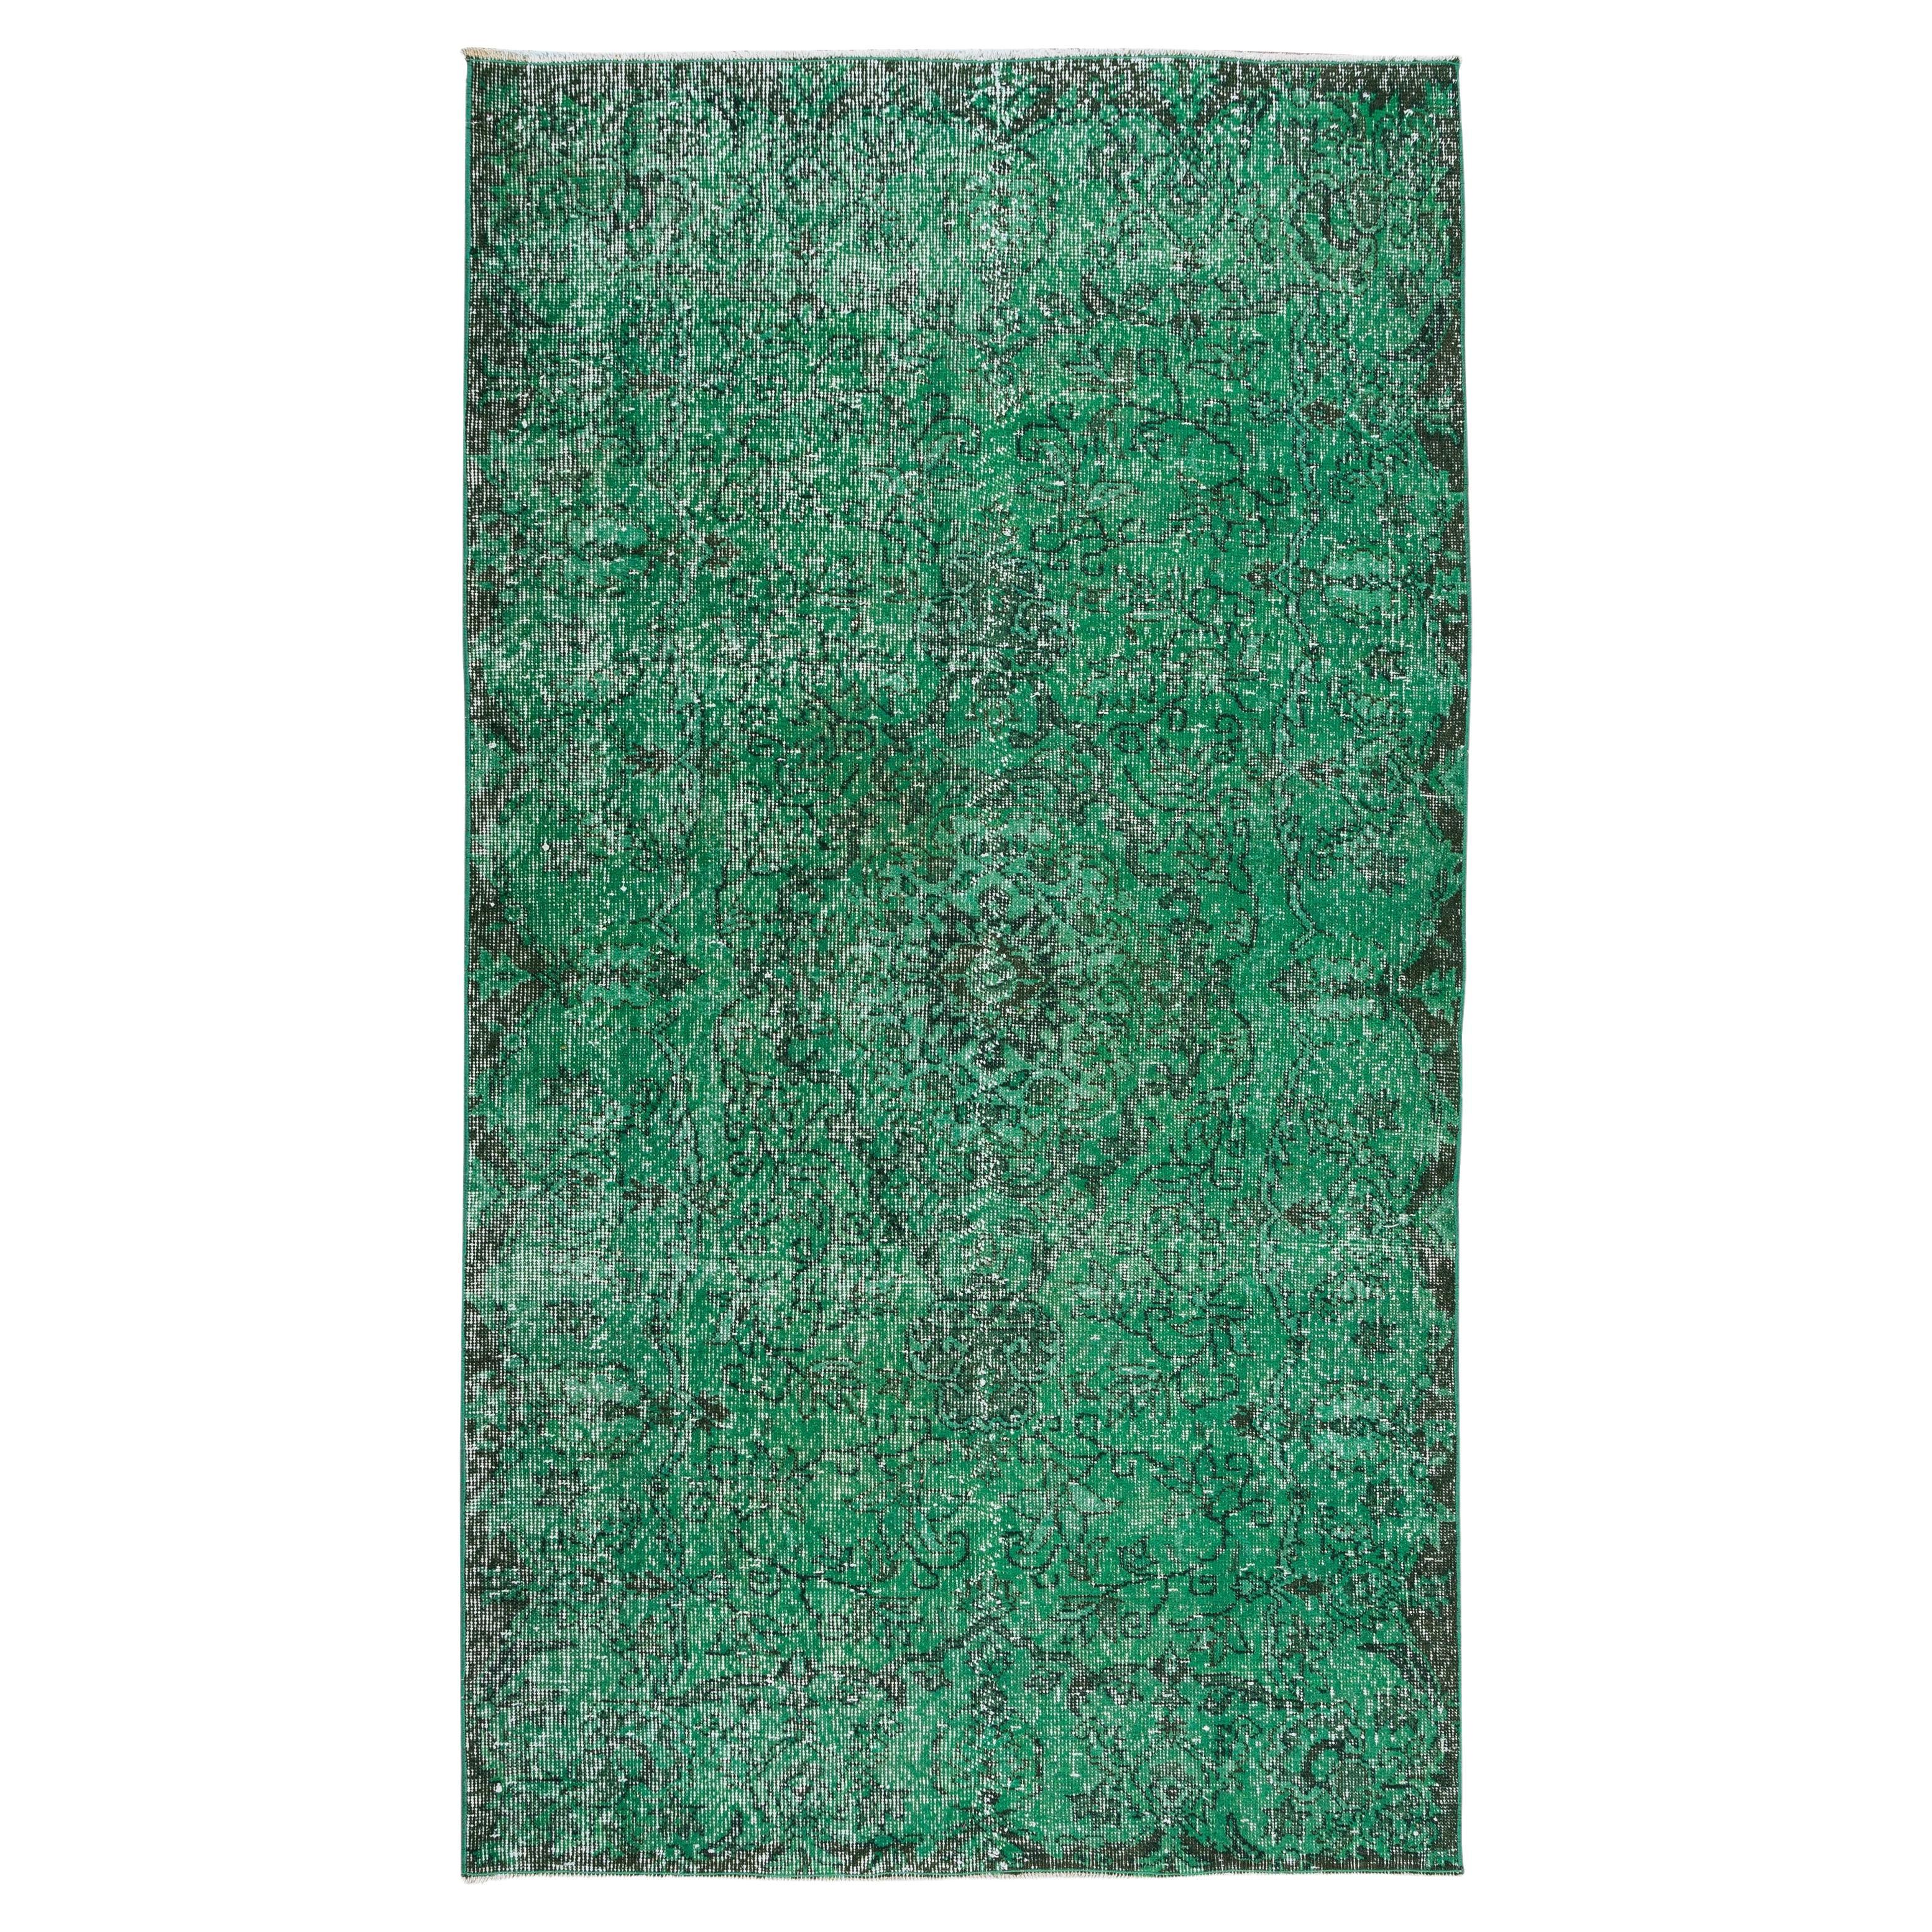 4x7.3 Ft Vintage Hand Knotted Turkish Rug Re-Dyed in Green 4 Modern Interiors